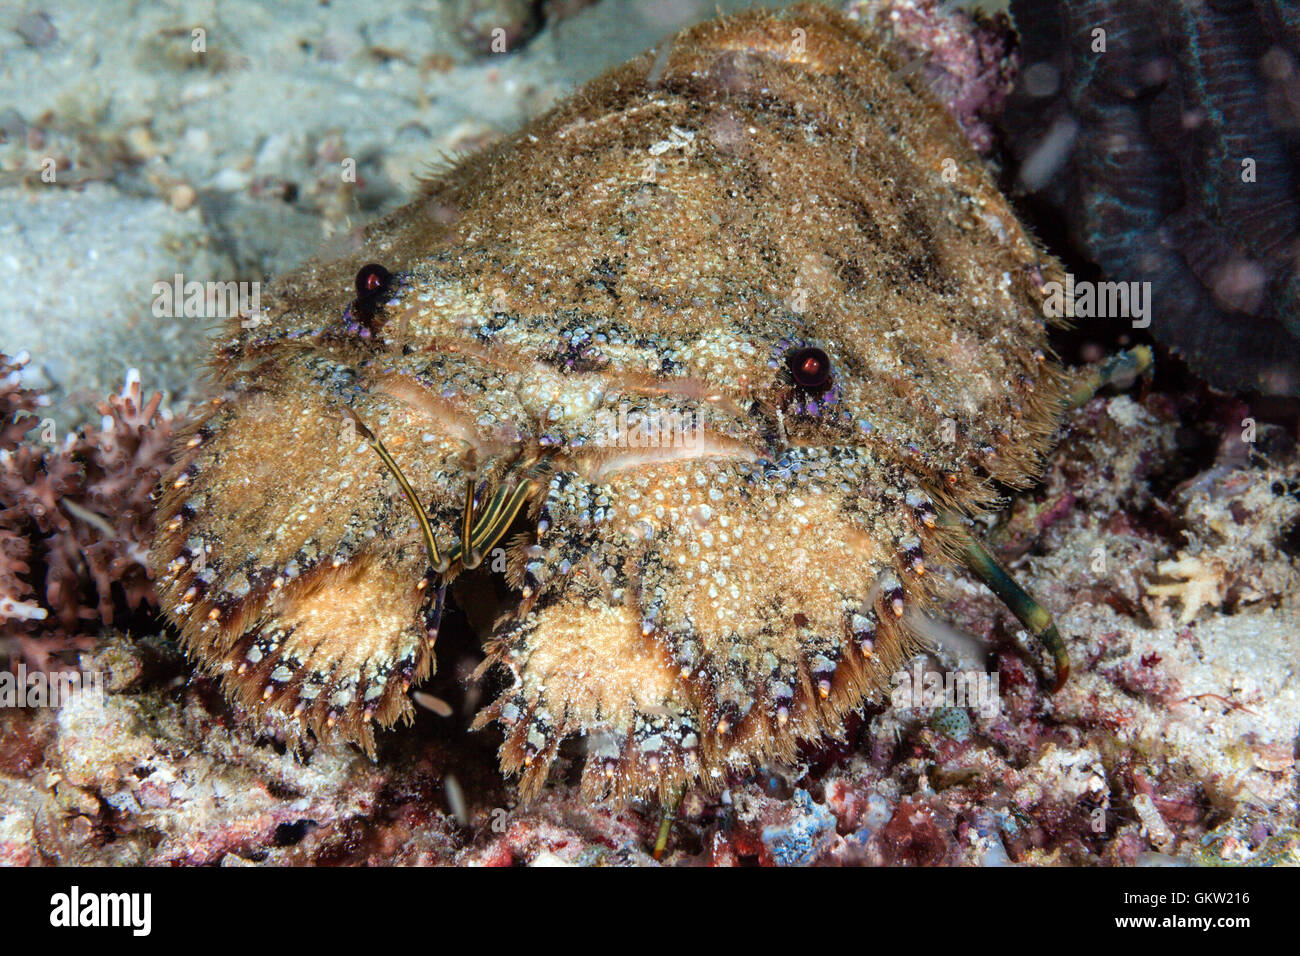 Slipper Lobster, Parrabacus japonicus, Ambon, Moluccas, Indonesia Stock Photo